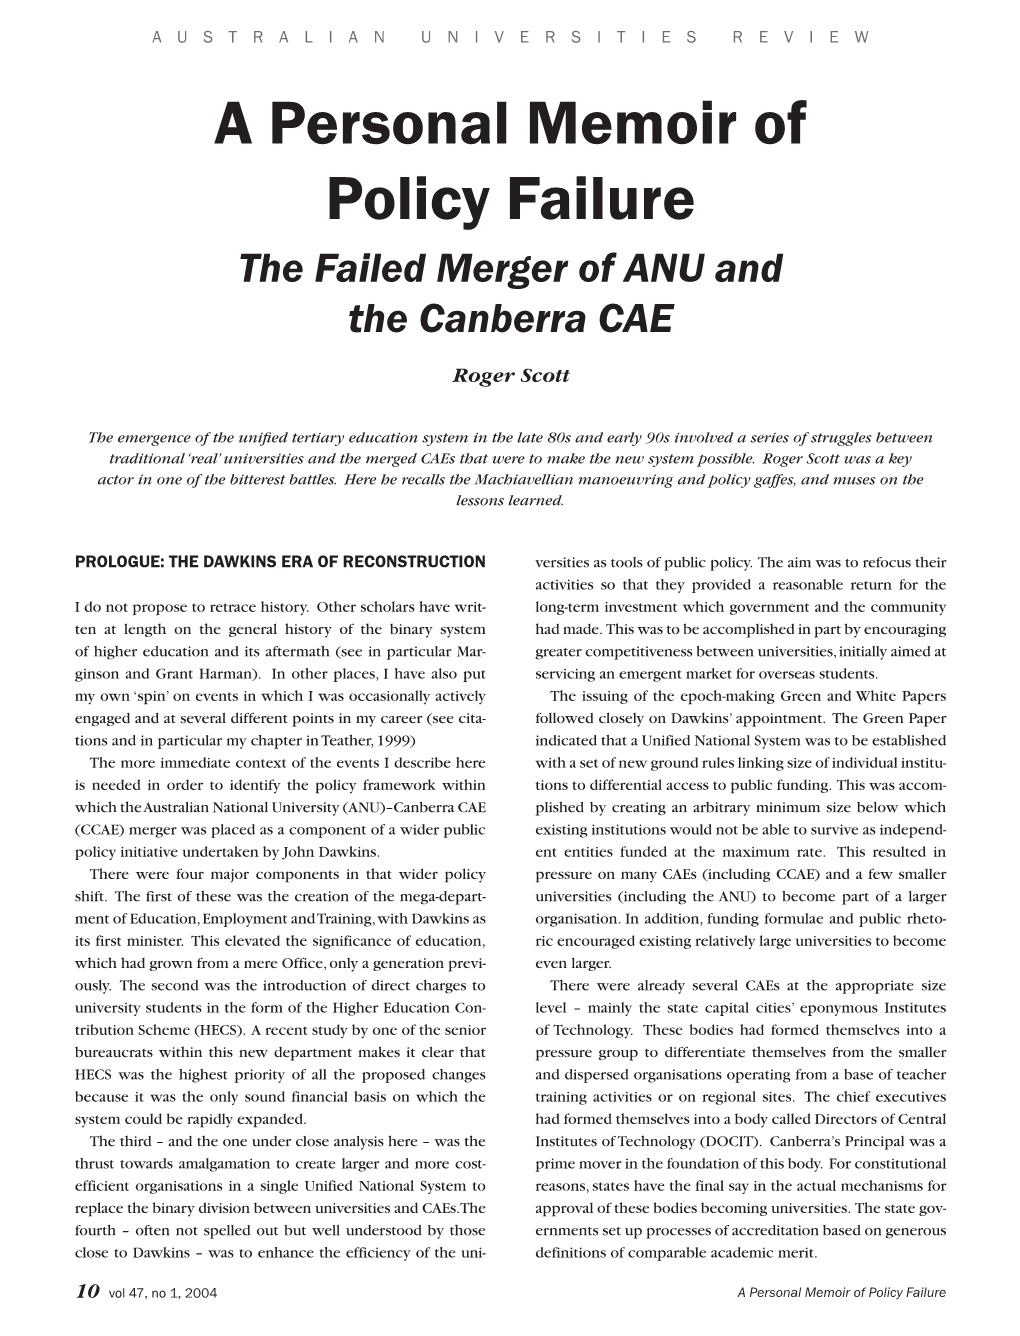 The Failed Merger of ANU and the Canberra CAE Roger Scott